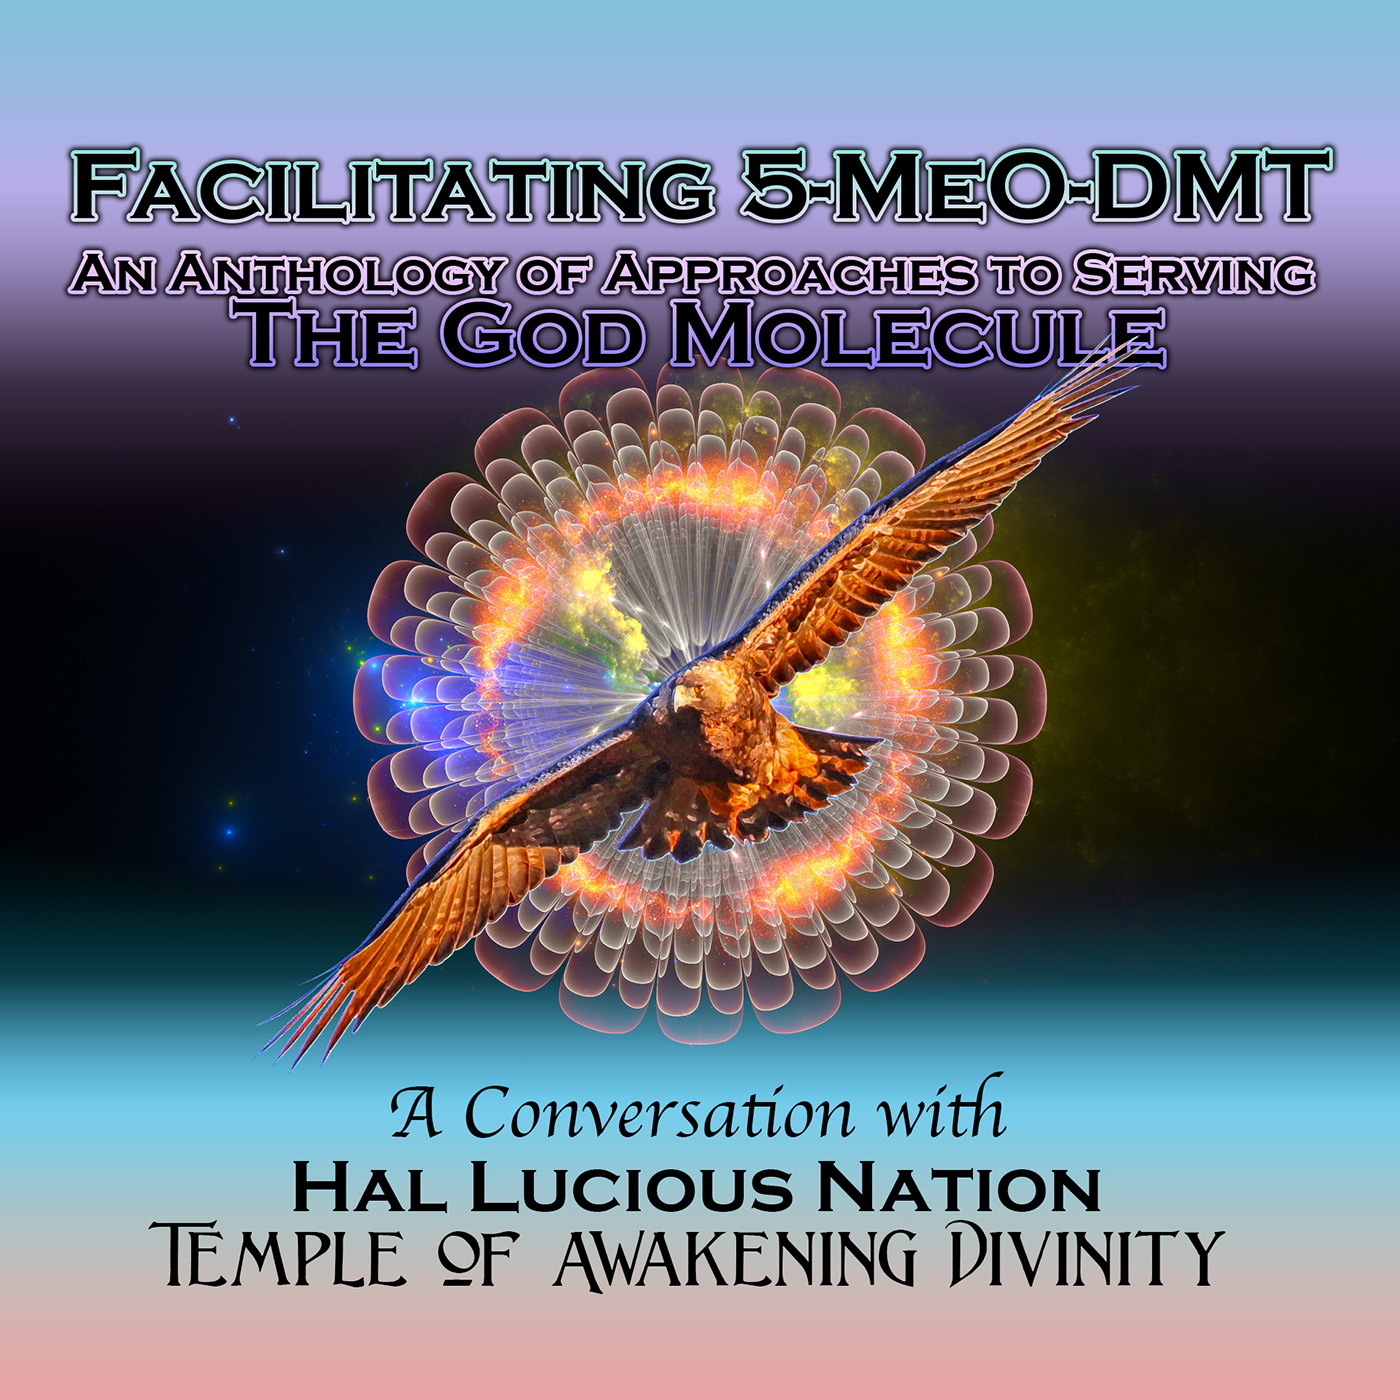 Episode 183: A Conversation with Hal from the Temple of Awakening Divinity